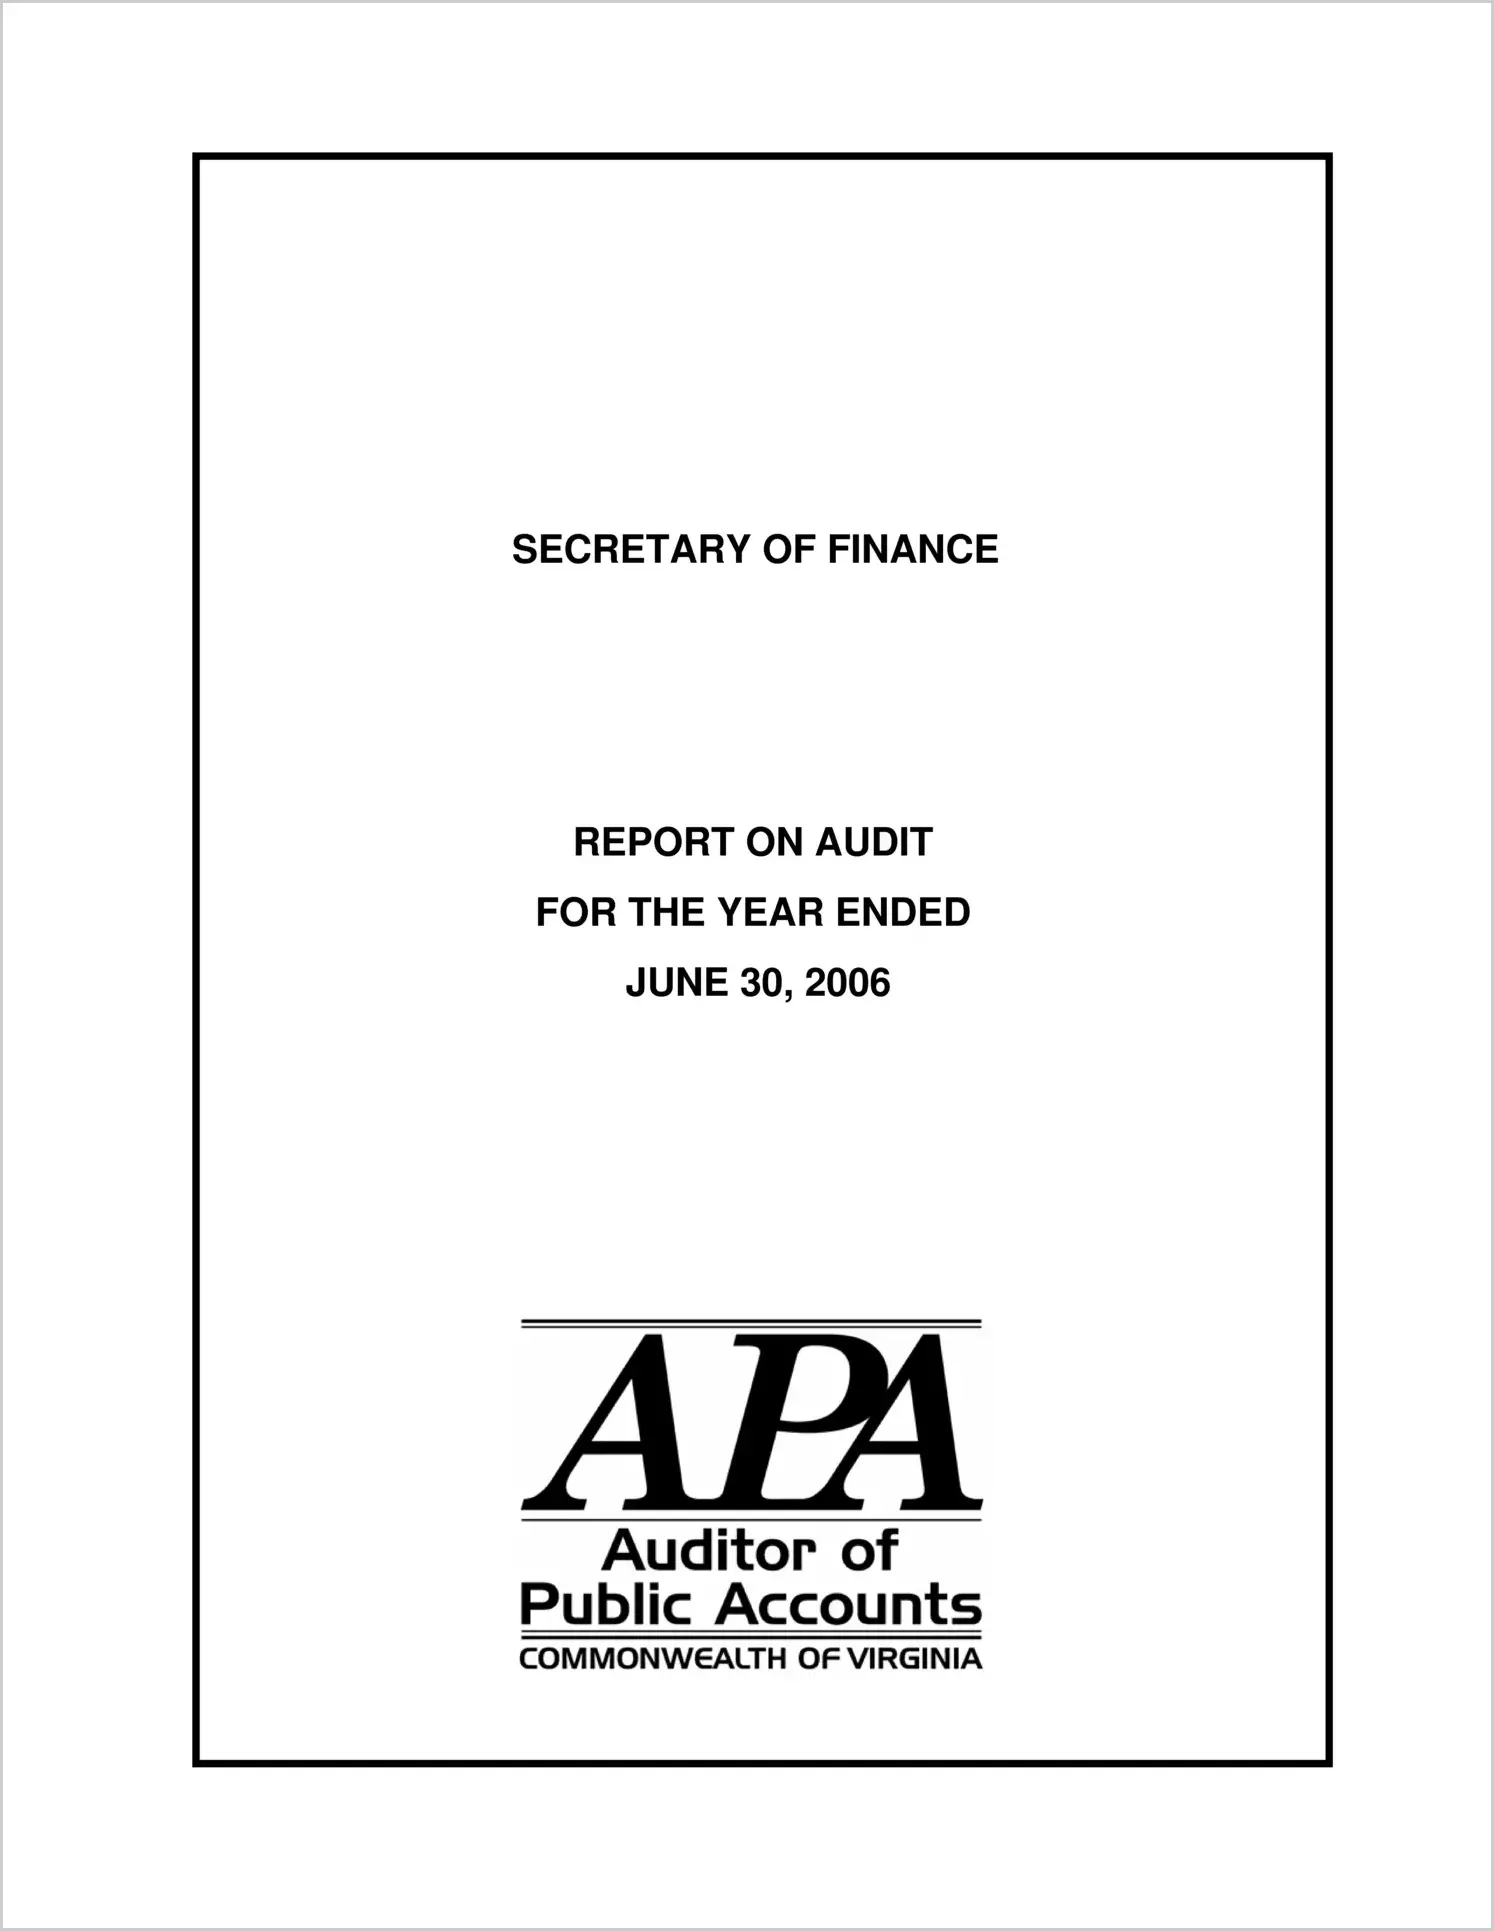 Agencies of the Secretary of Finance for the year ended June 30, 2006